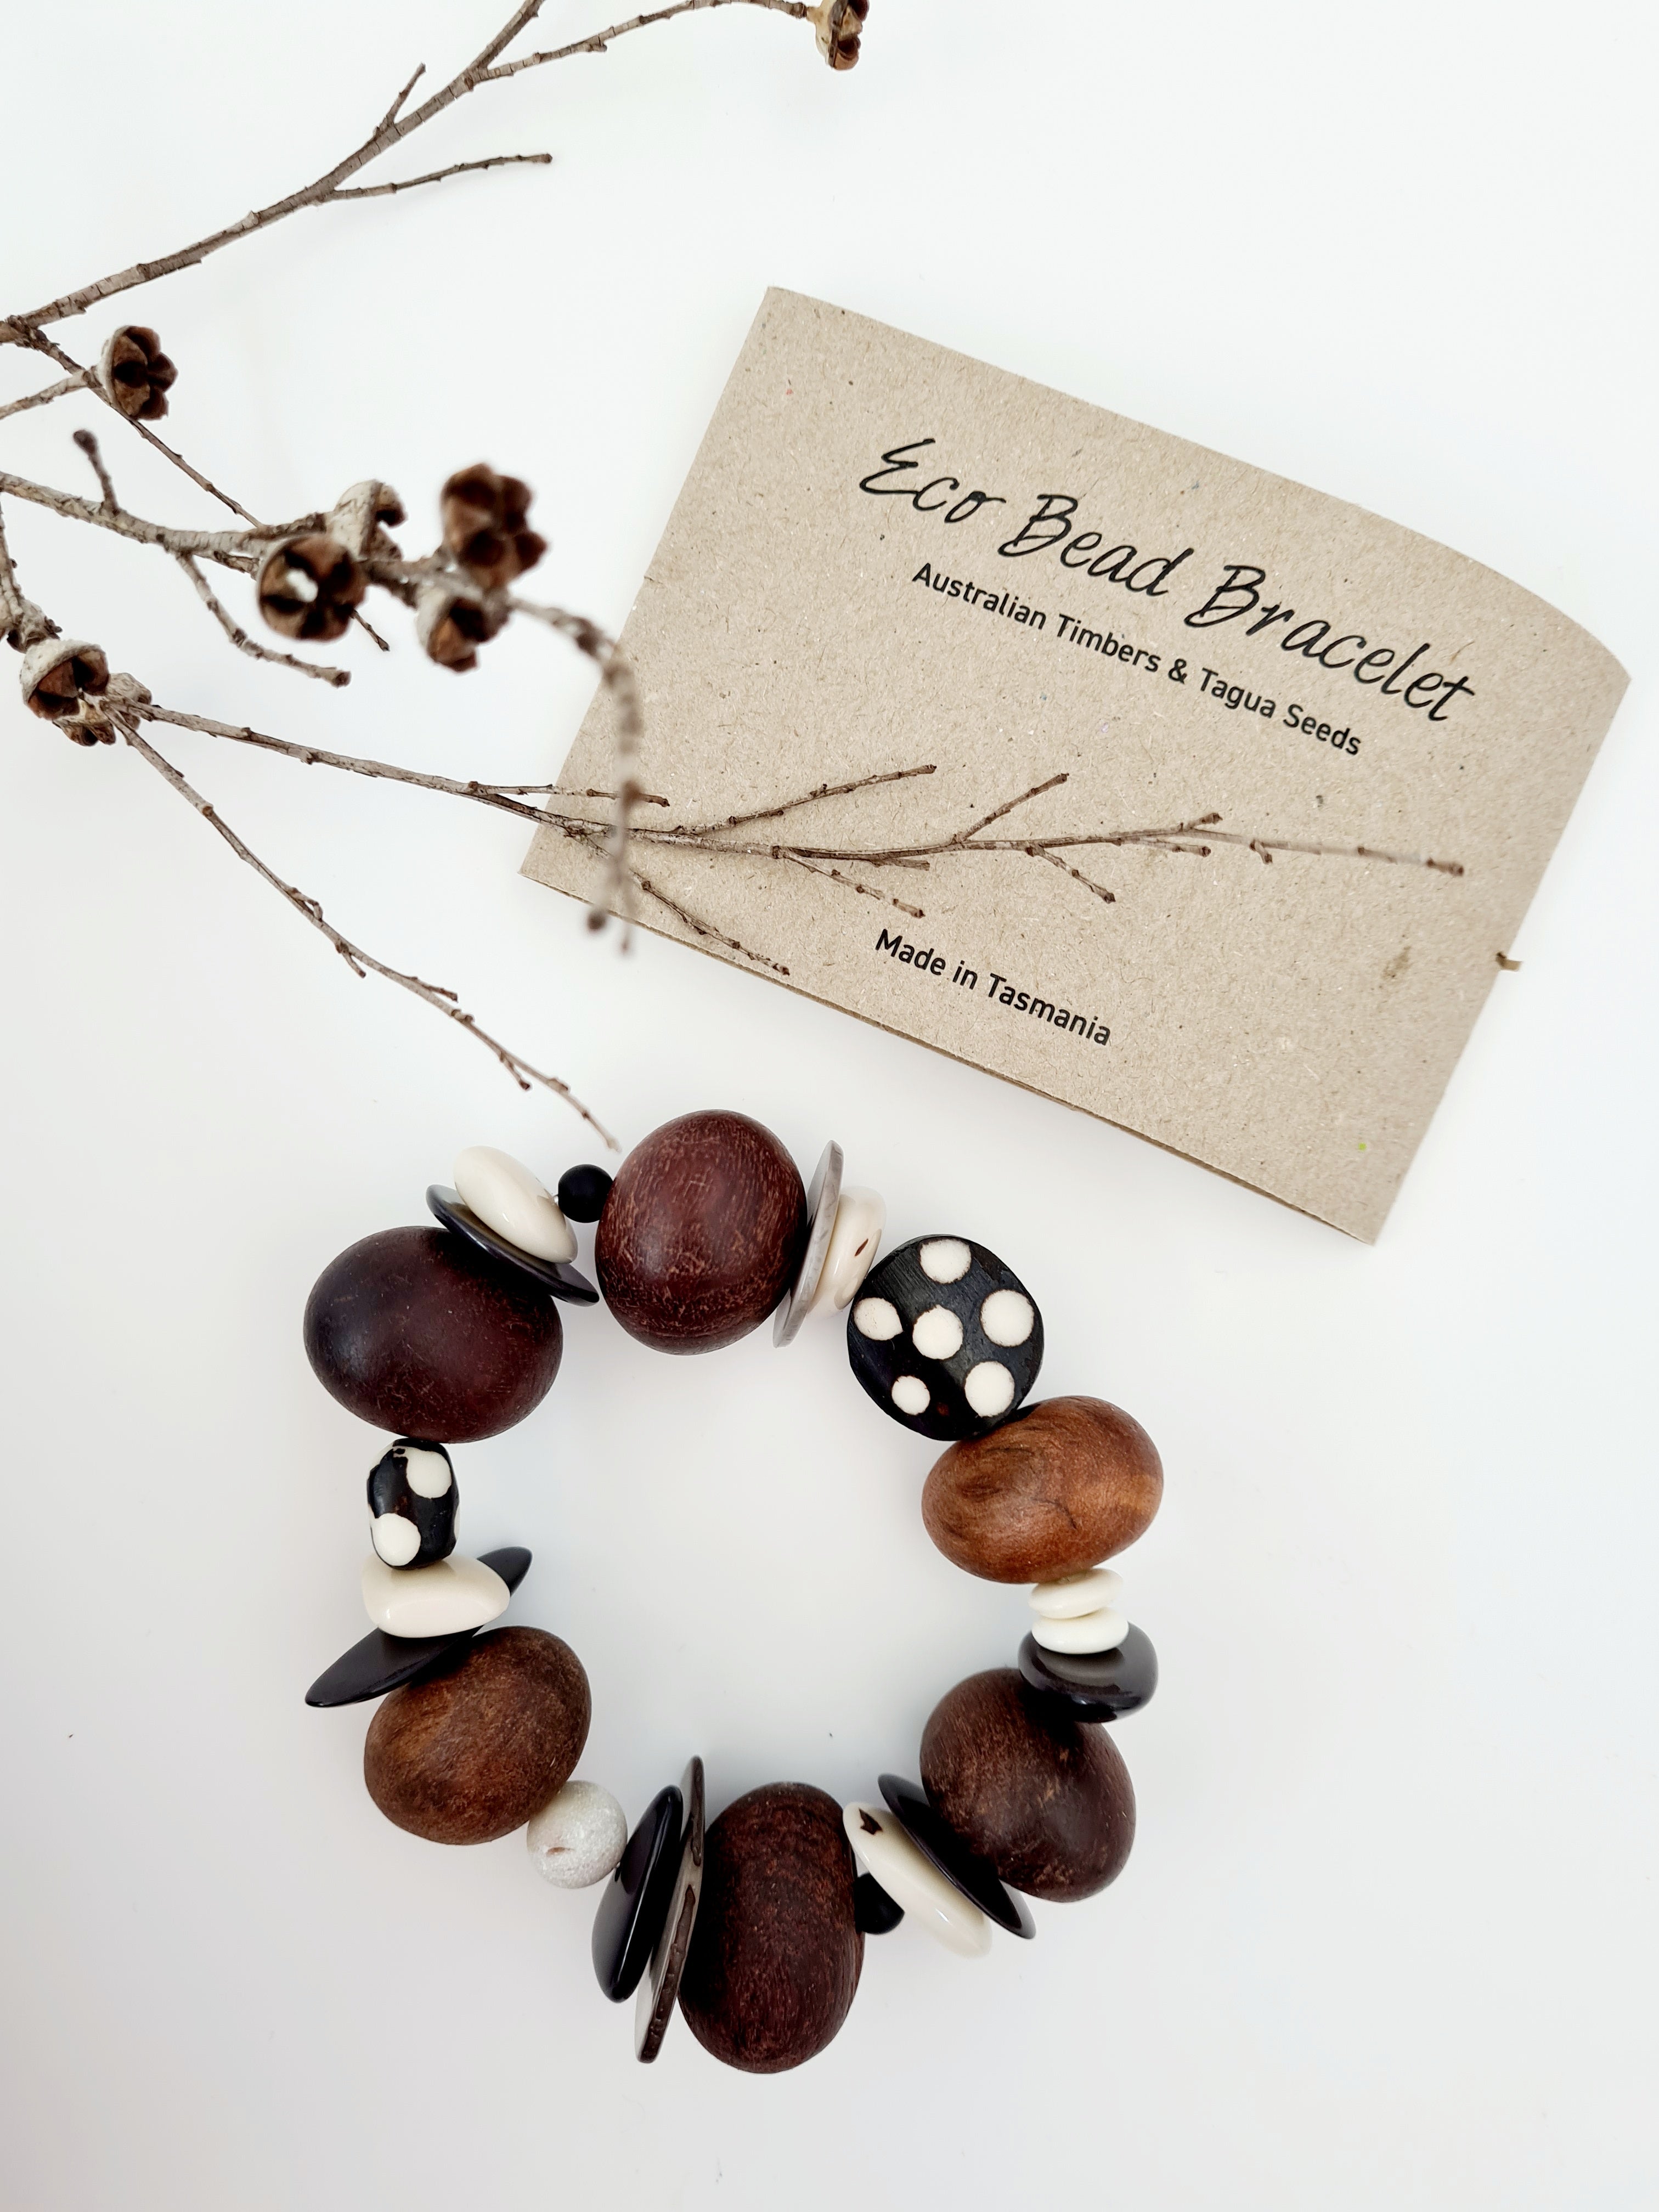 Eco Beads Bracelet Eco Beads The Spotted Quoll Sticks & Stones 